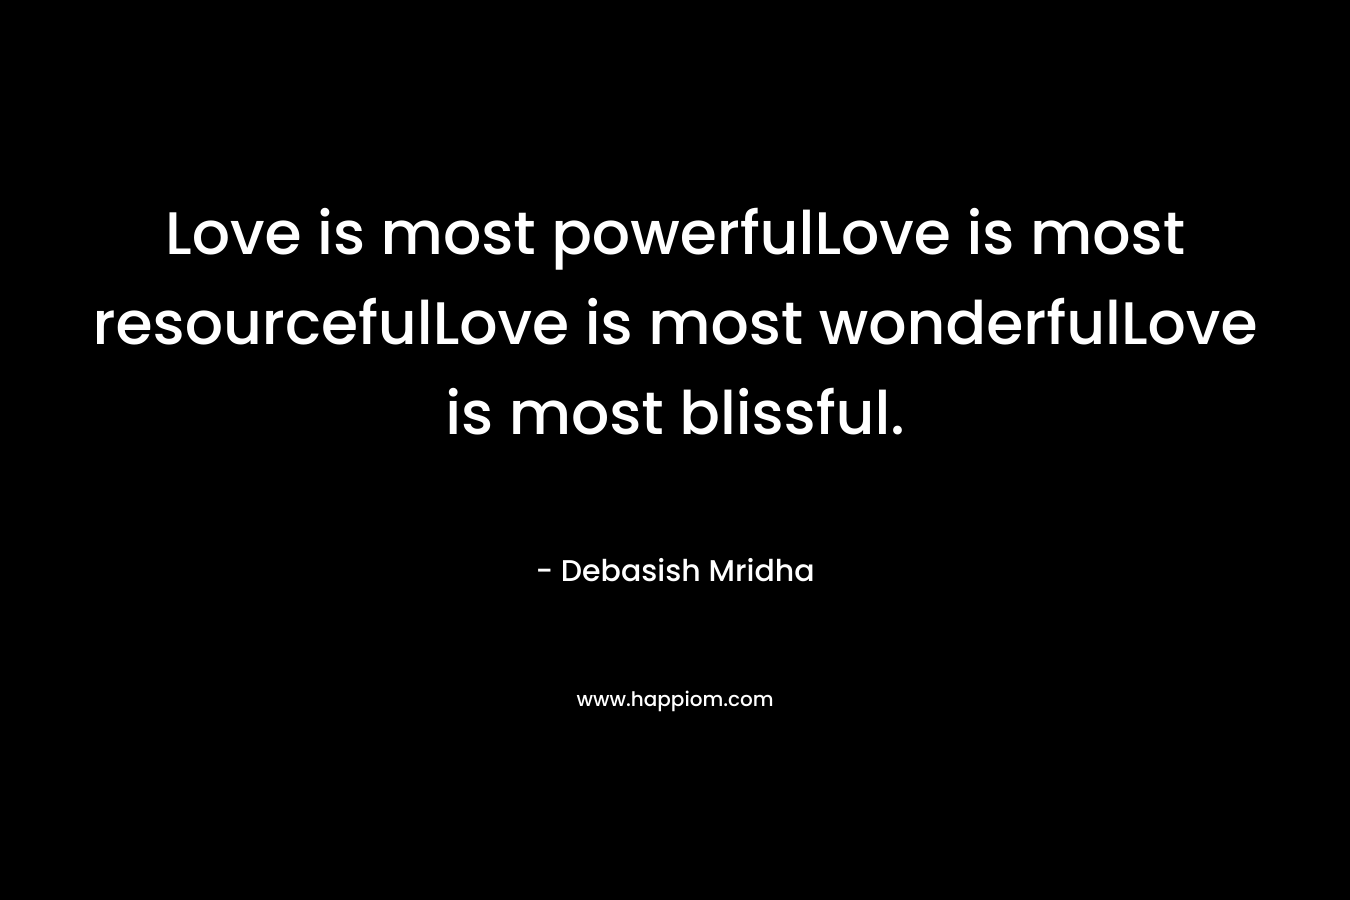 Love is most powerfulLove is most resourcefulLove is most wonderfulLove is most blissful.